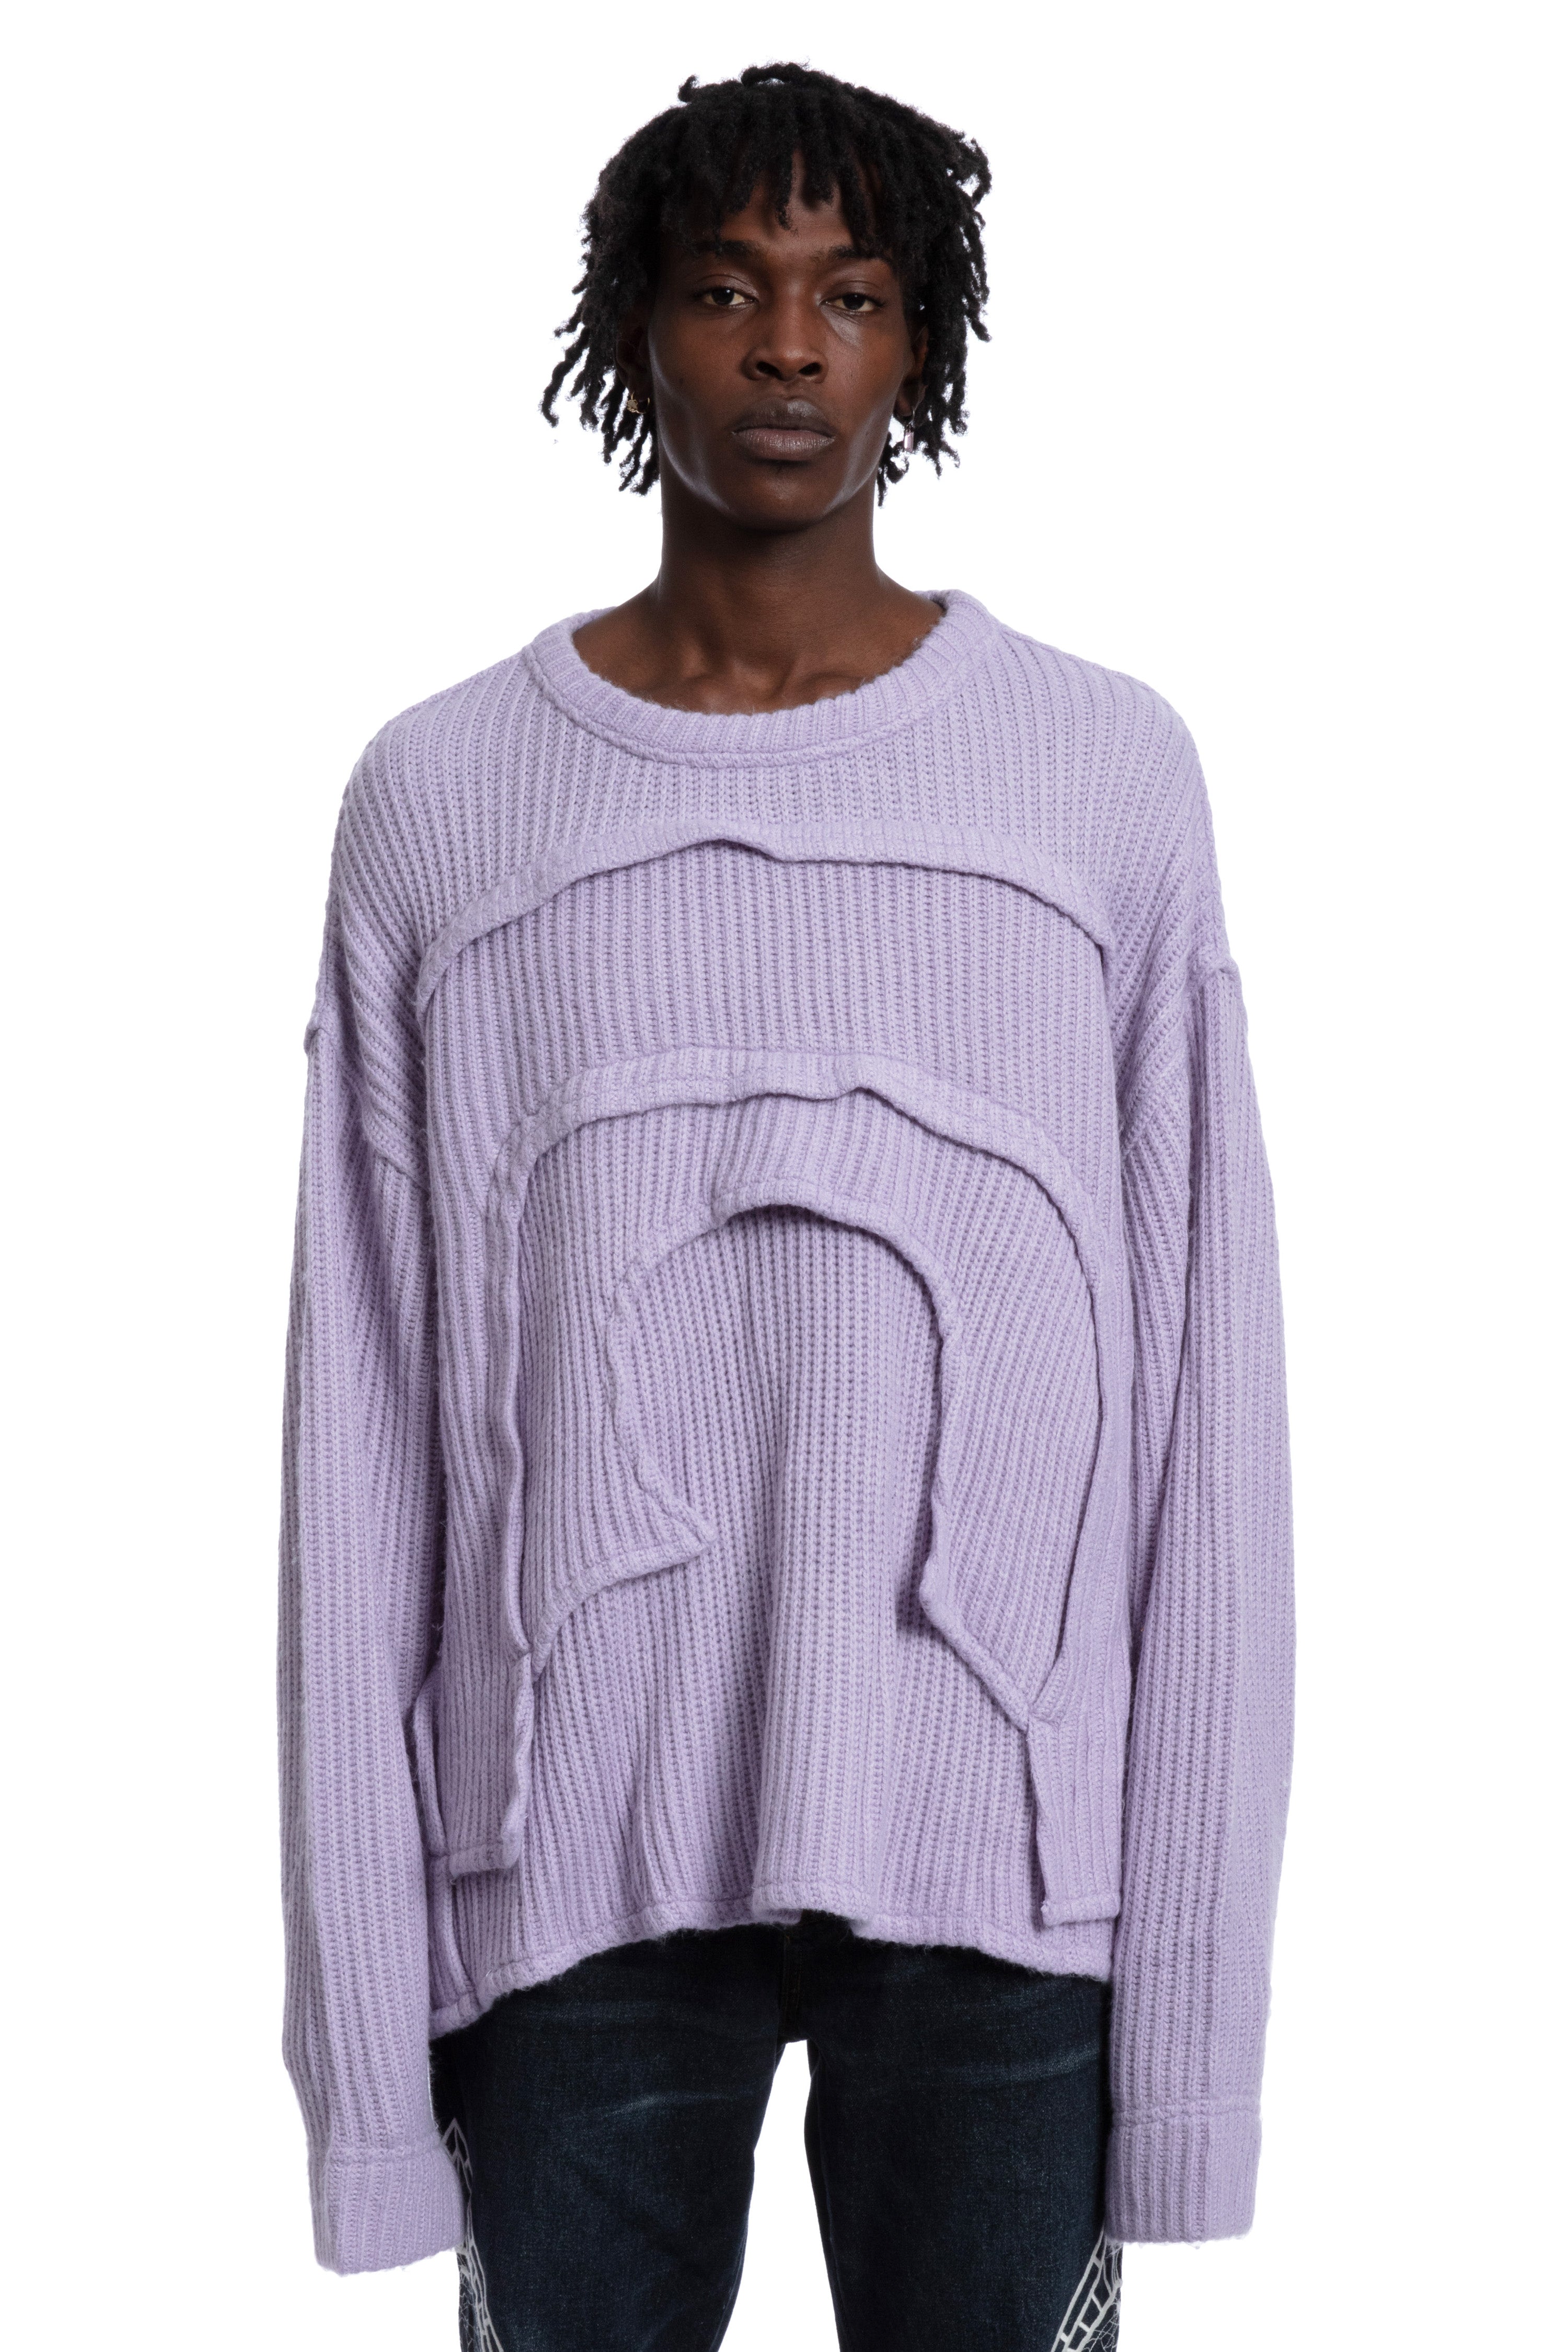 L'ARC WOVEN SWEATER – WHO DECIDES WAR